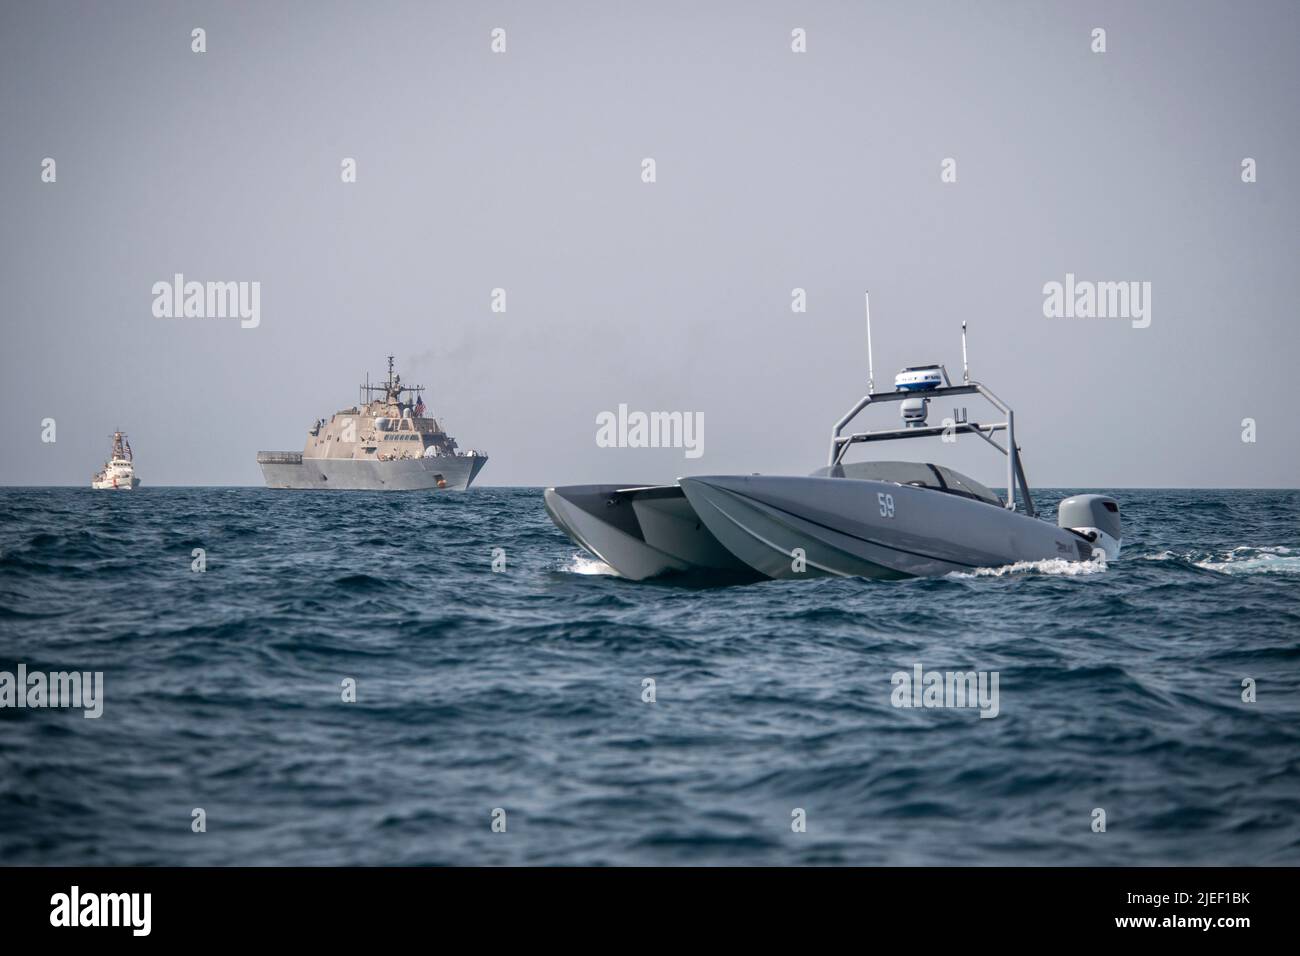 220626-N-NS602-1204 ARABIAN GULF (June 26, 2022) A Devil Ray T-38 unmanned surface vessel, littoral combat ship USS Sioux City (LCS 11), and U.S. Coast Guard cutter USCGC Baranof (WPB 1318) sail in the Arabian Gulf, June 26. U.S. naval forces regularly operate across the Middle East region to help ensure security and stability. (U.S. Navy photo by Chief Mass Communication Specialist Roland A. Franklin) Stock Photo